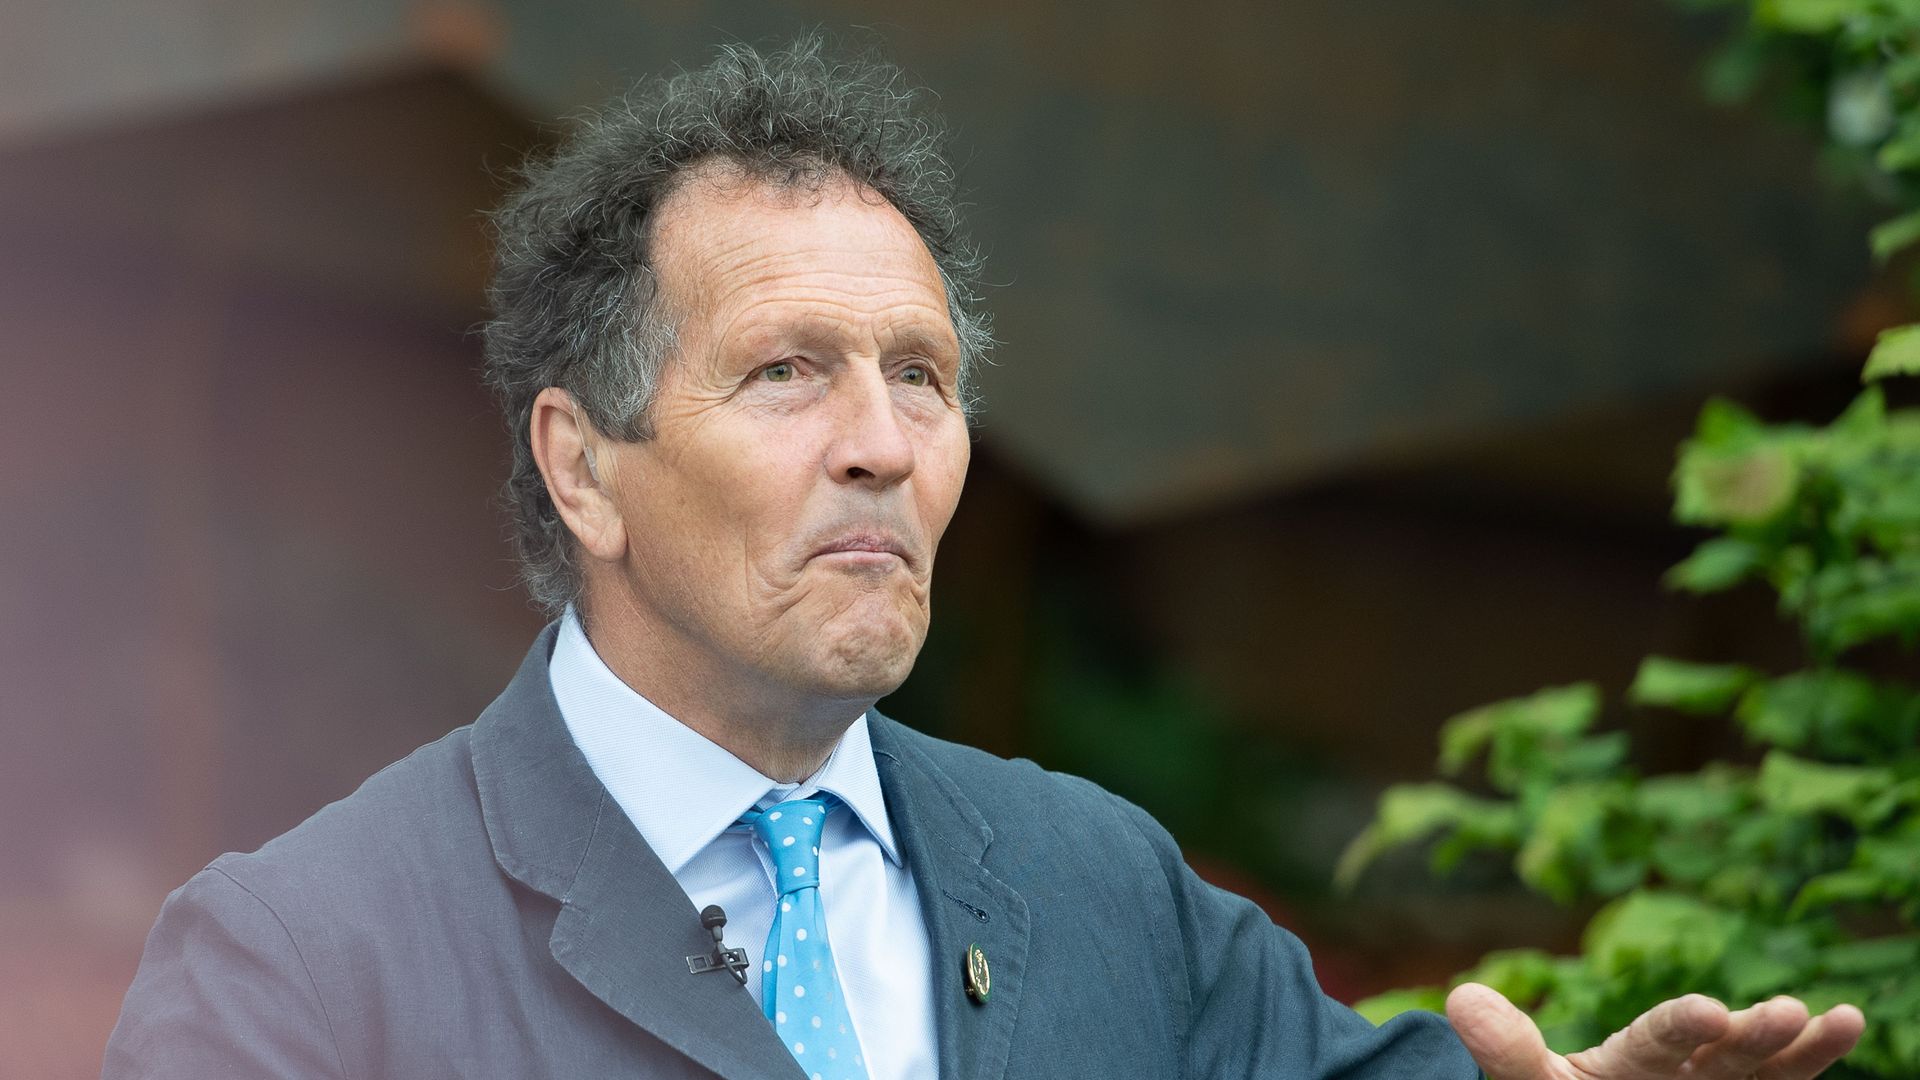 Monty Don looking serious in a suit